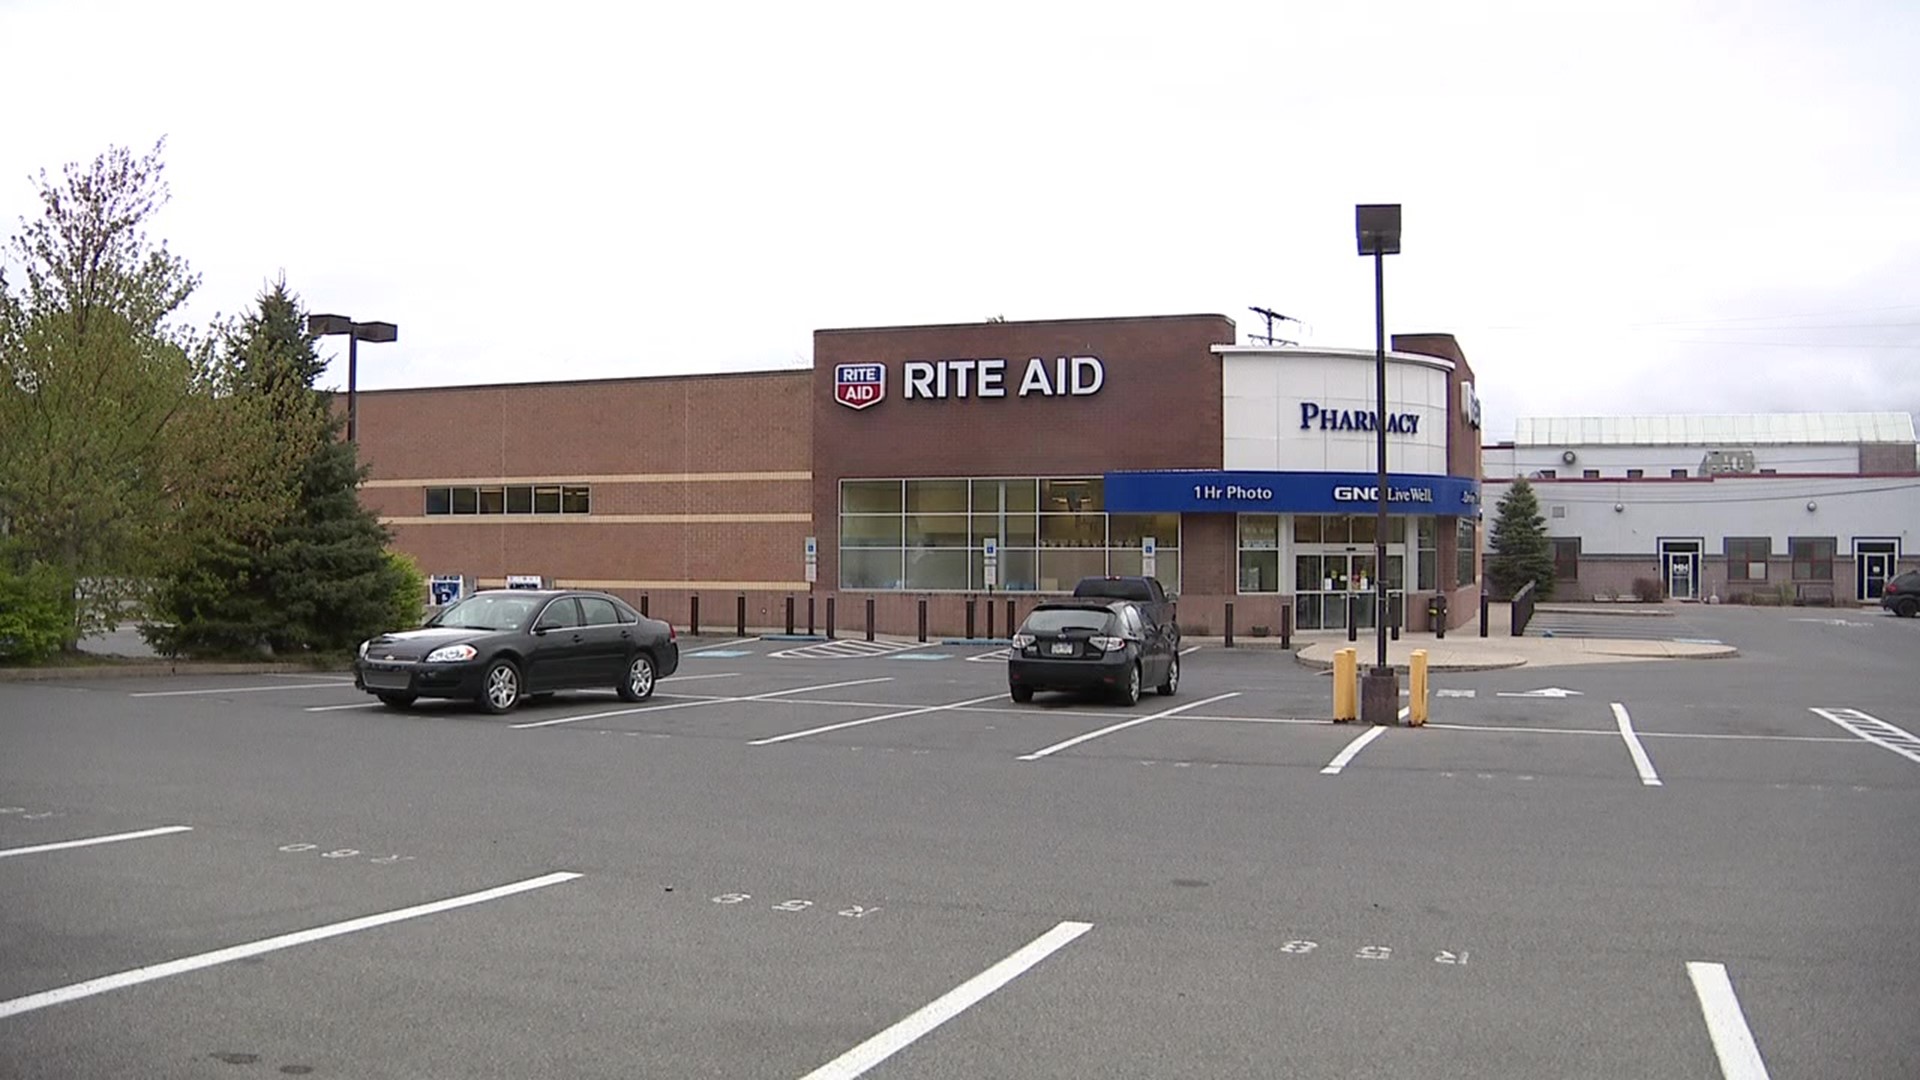 You can now get tested for COVID-19 at a Rite Aid in Monroe County. The pharmacy in East Stroudsburg started free testing on Monday.